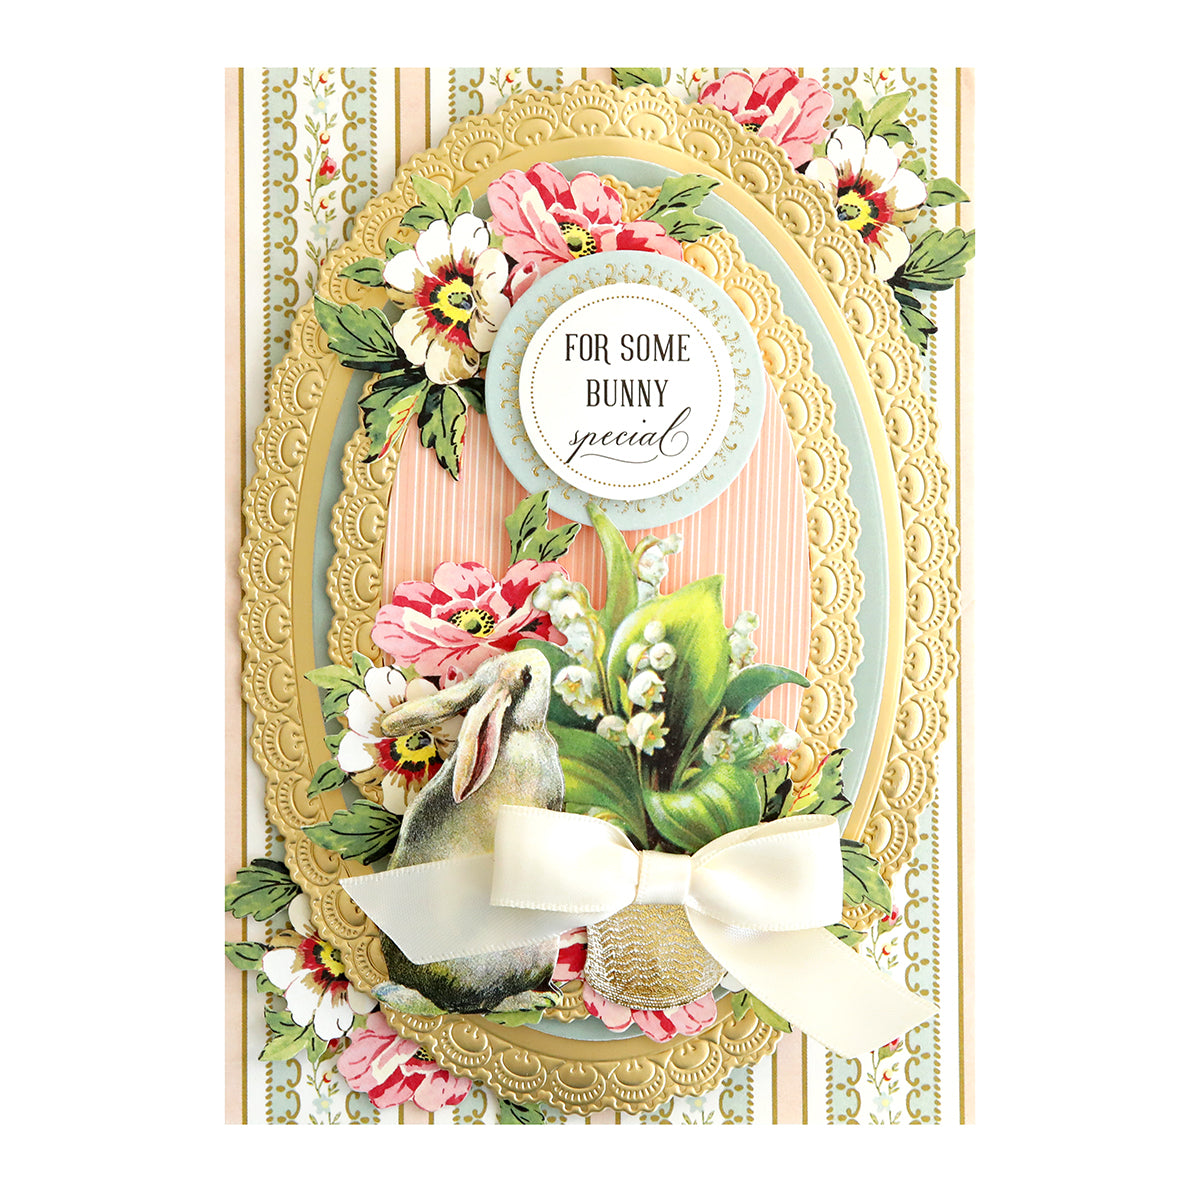 A card adorned with Bunny Stickers and Sentiments.